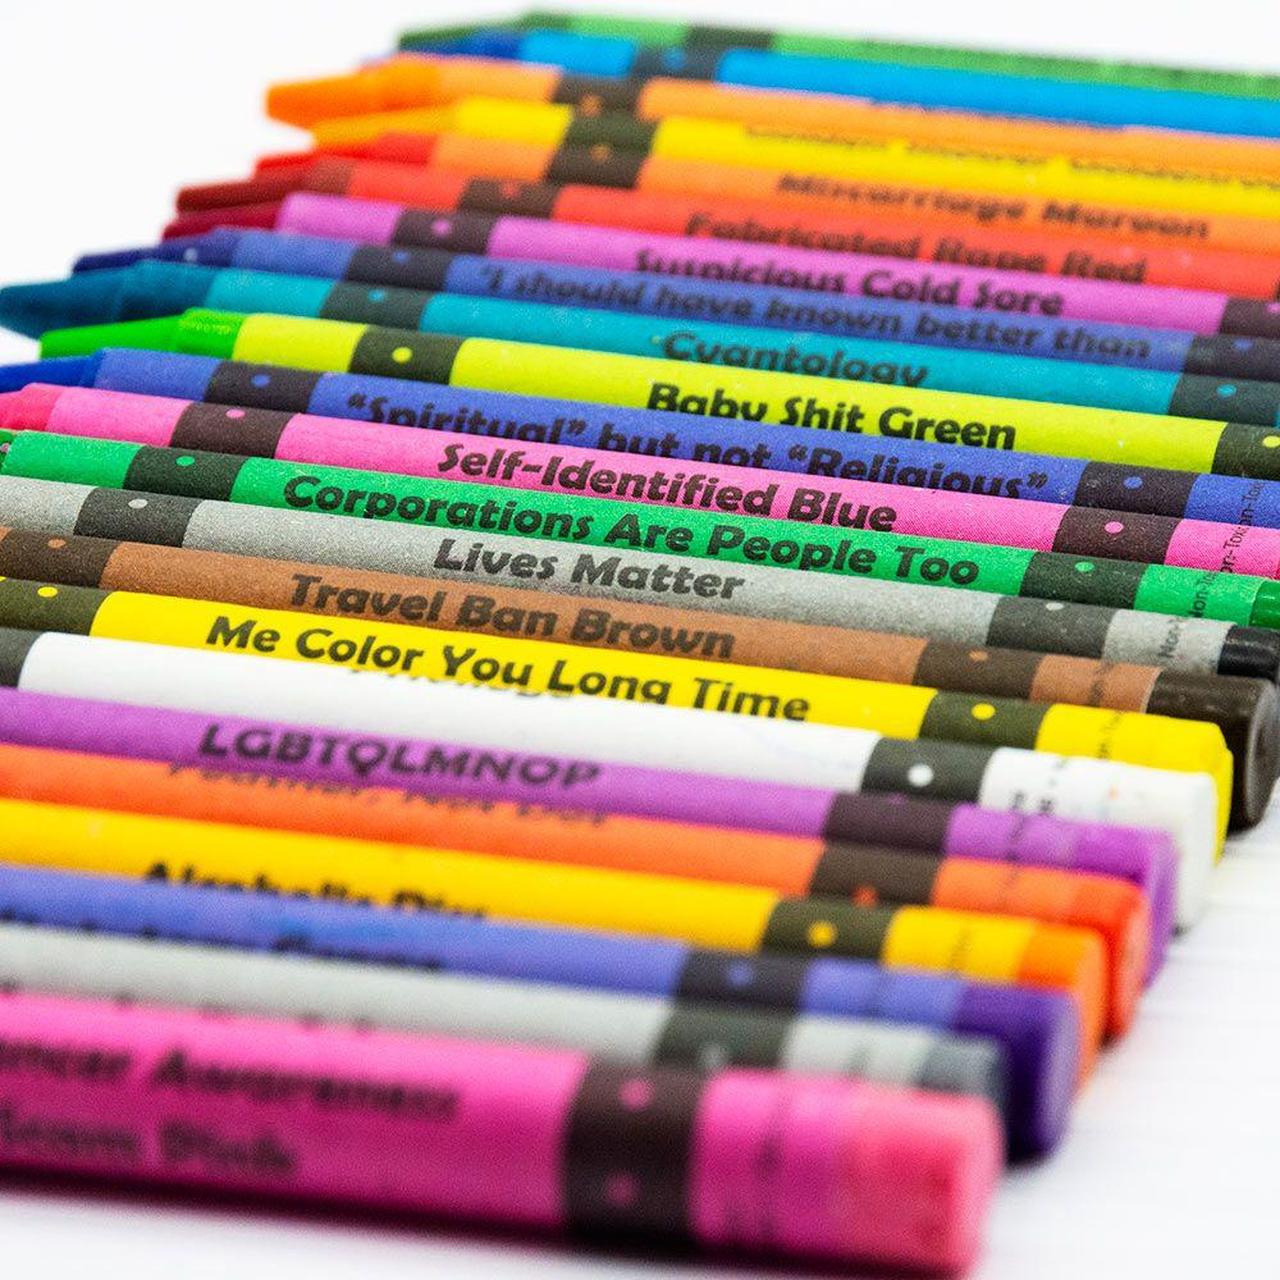 Pot Pack Edition – Offensive Crayons